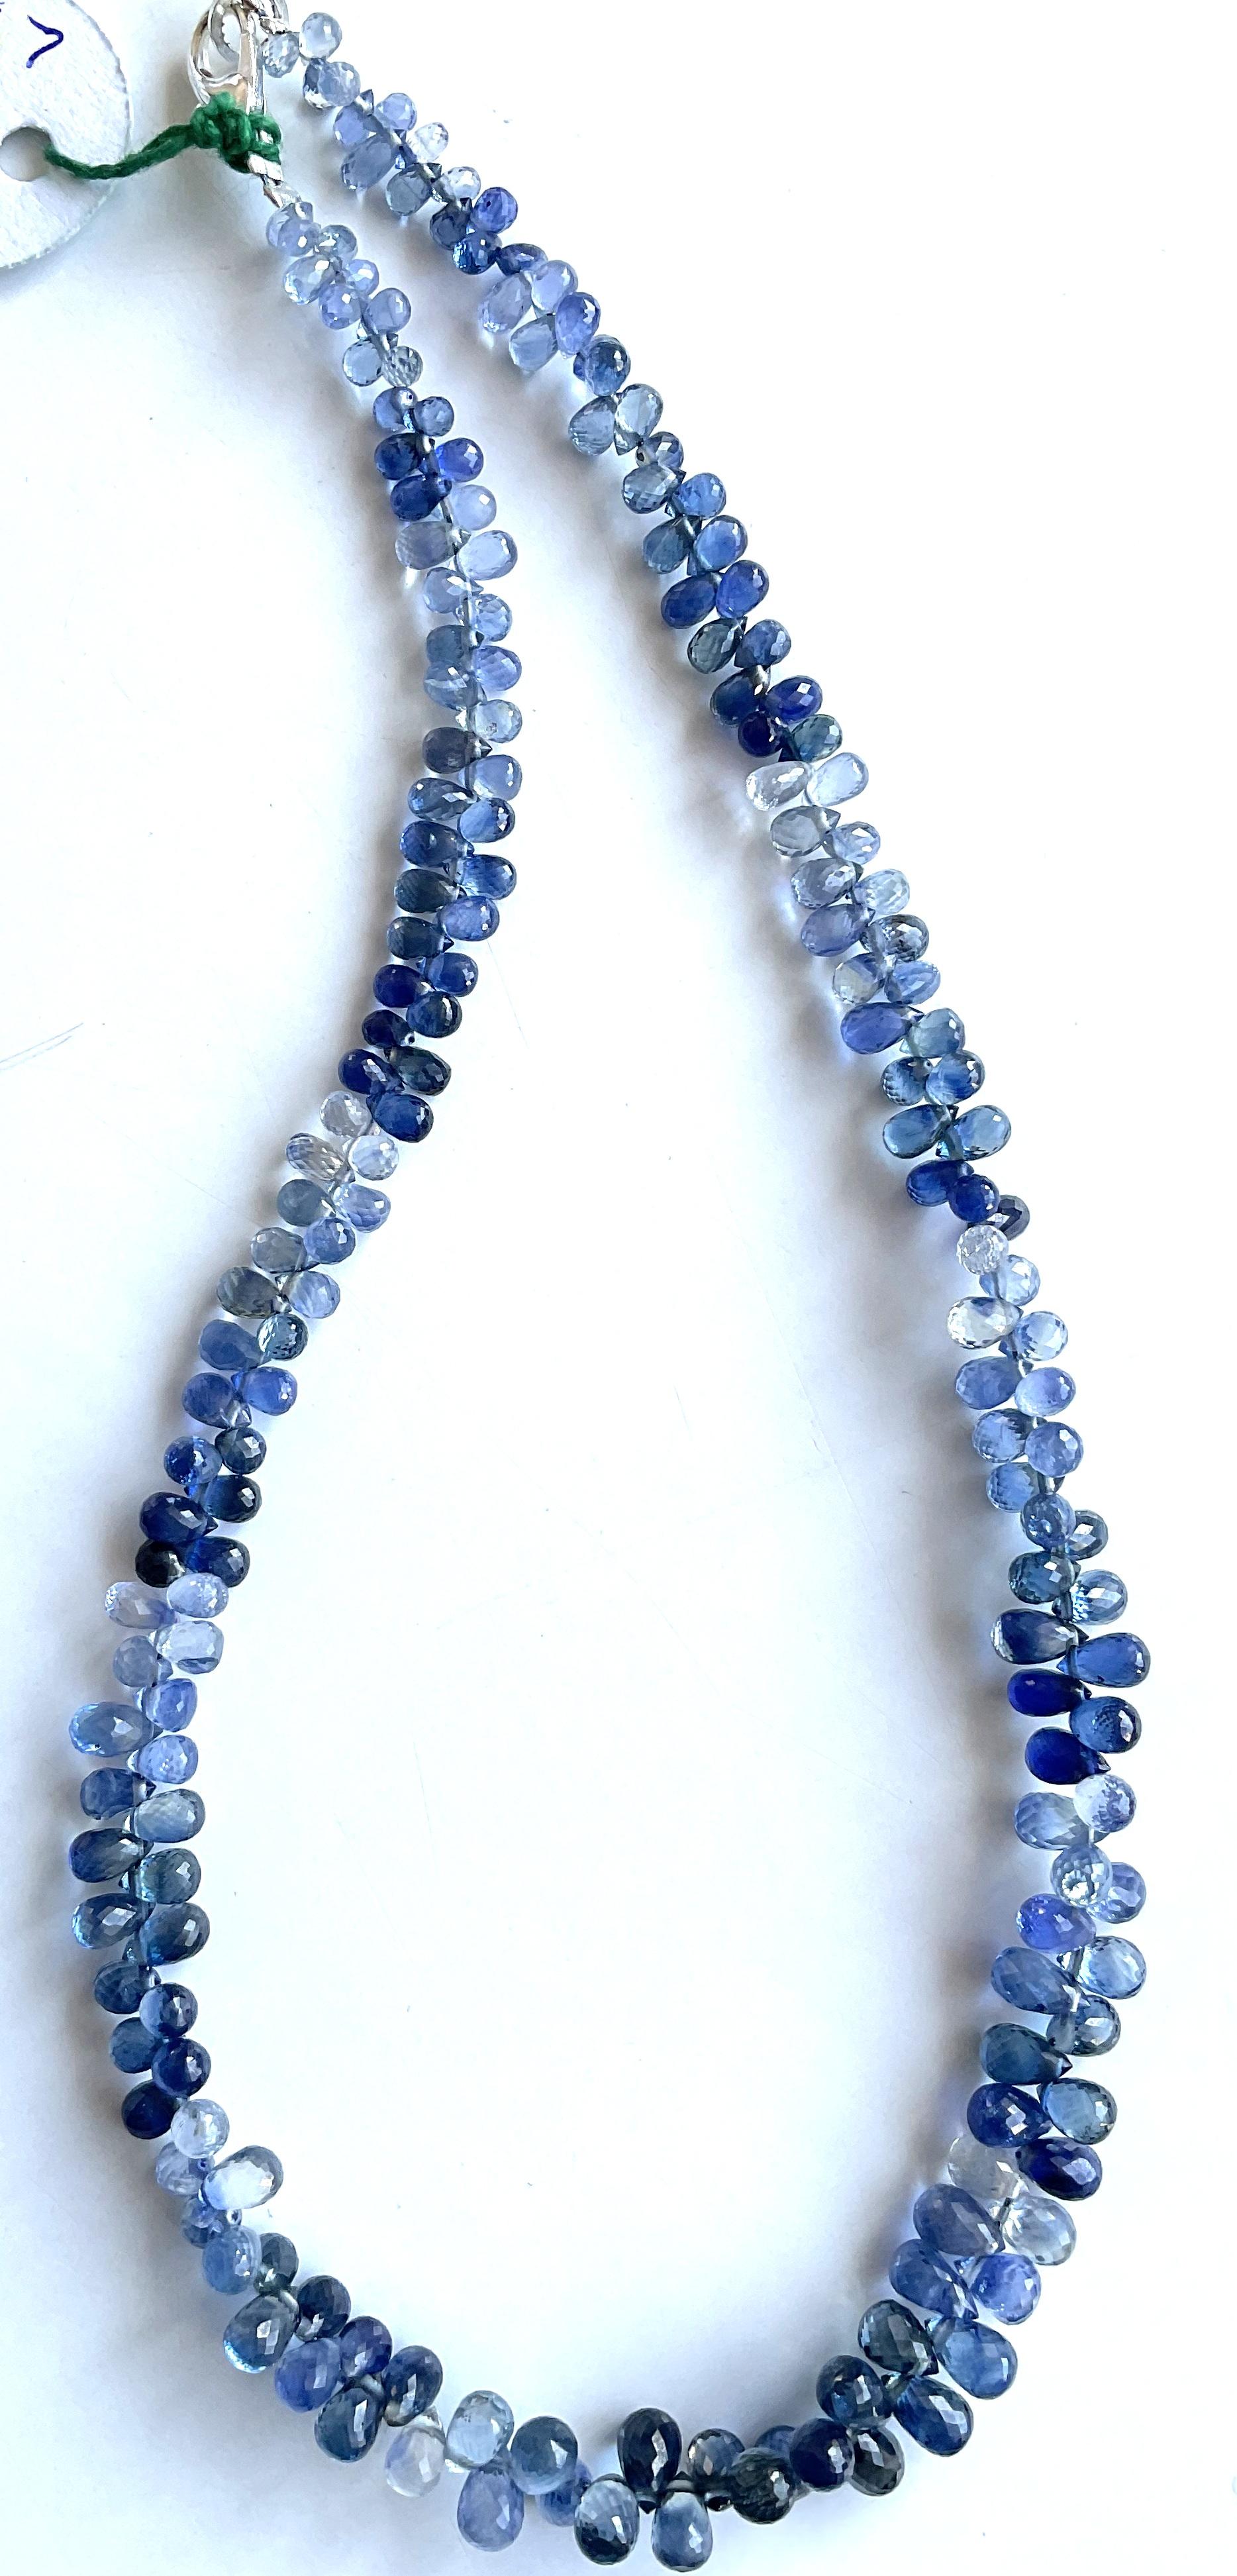 80.00 Carats Blue Sapphire Drops Top Quality Natural Gemstone For Fine Jewelry